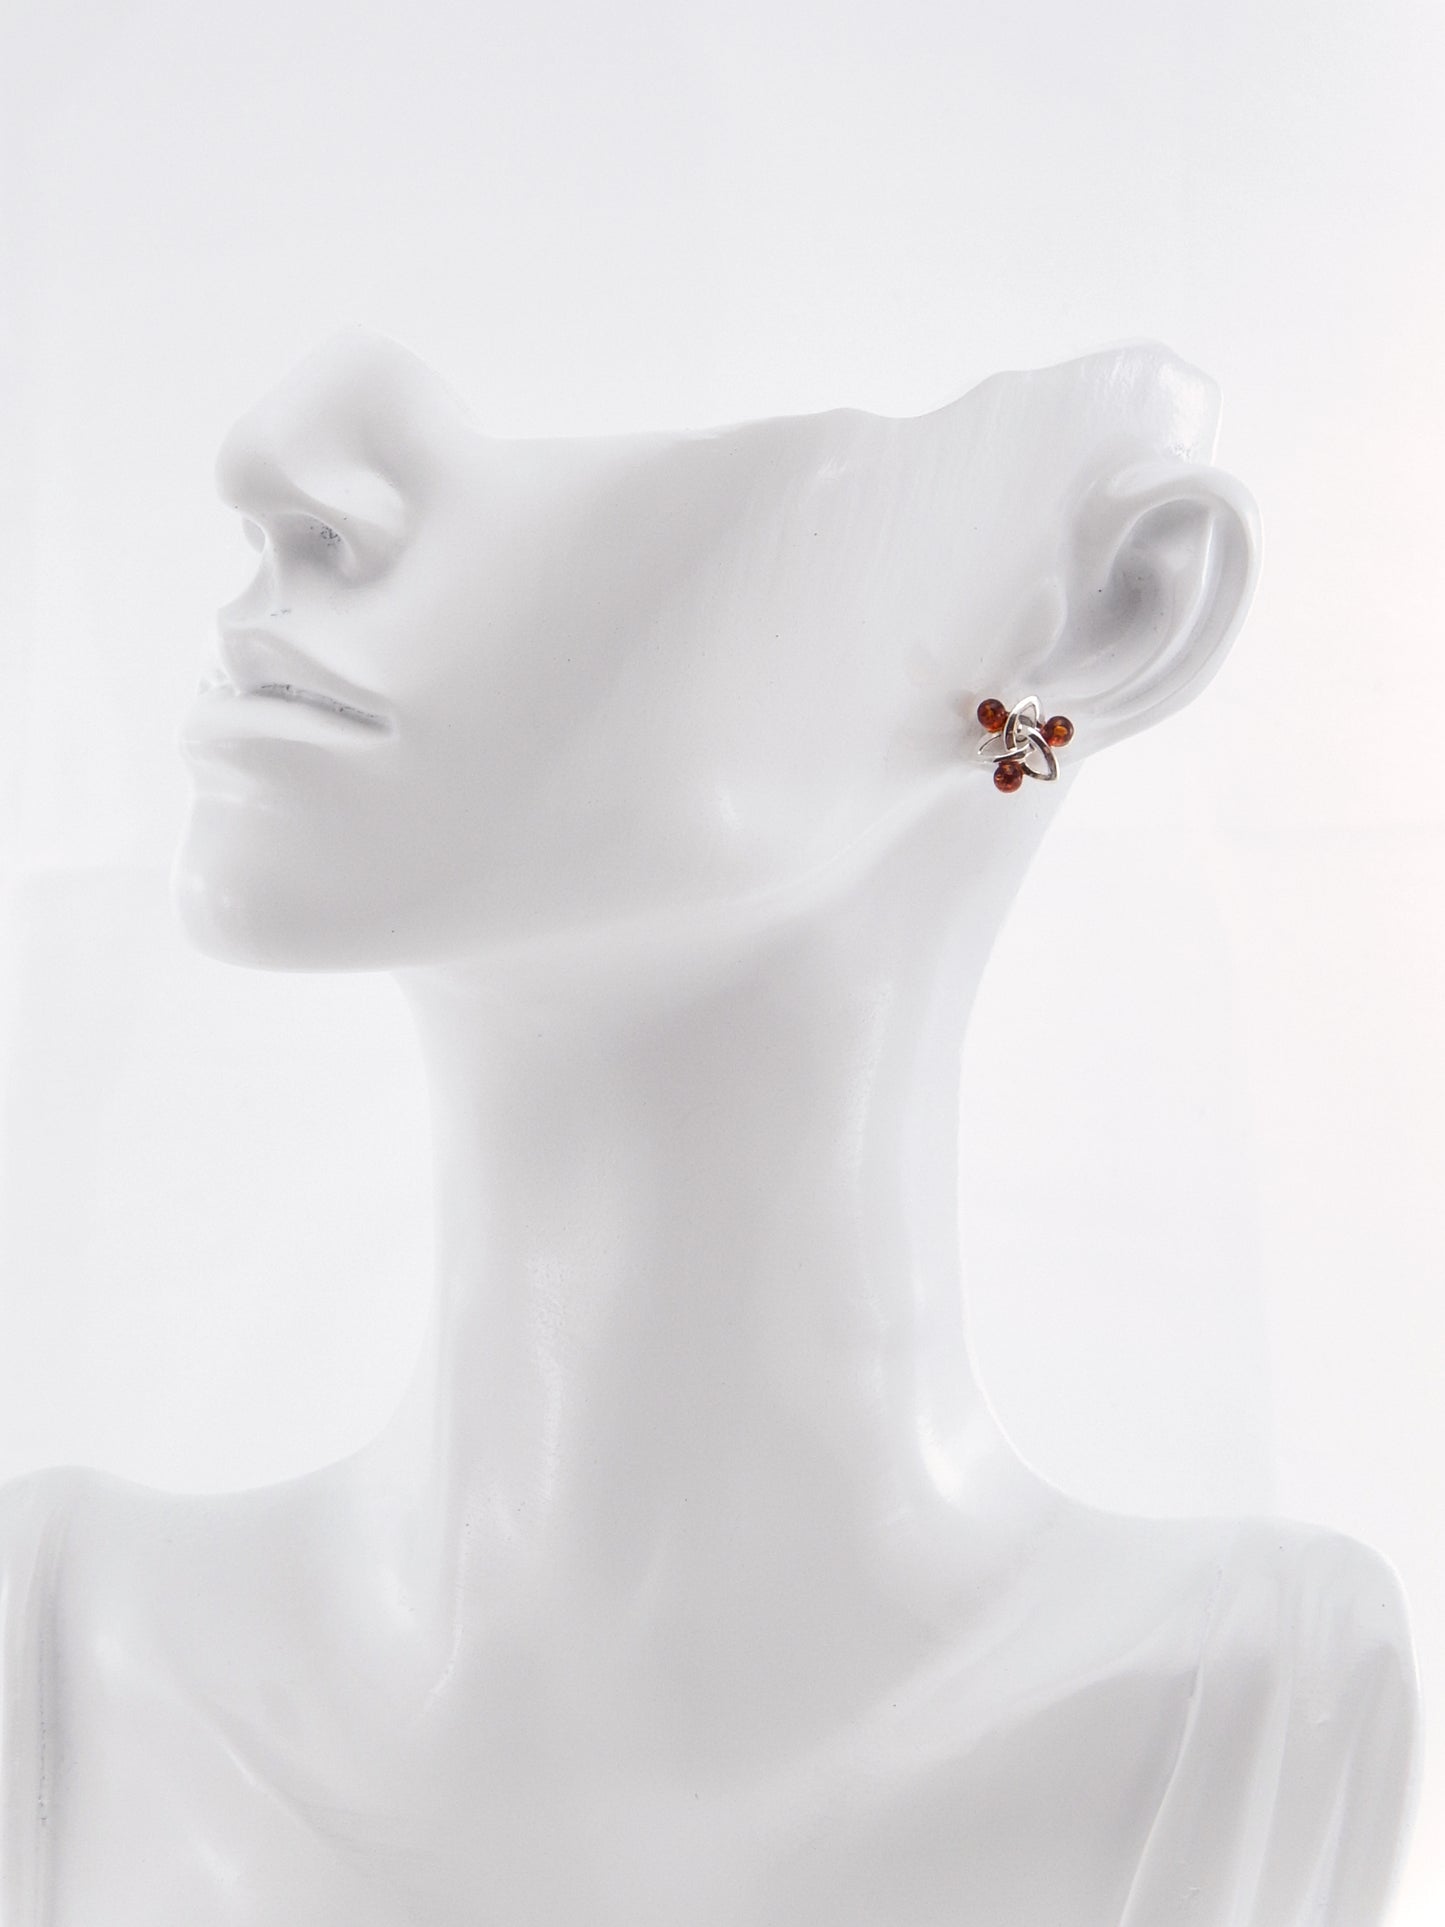 Natural Baltic Cognac Amber Trinity Knot Earrings in 925 Silver